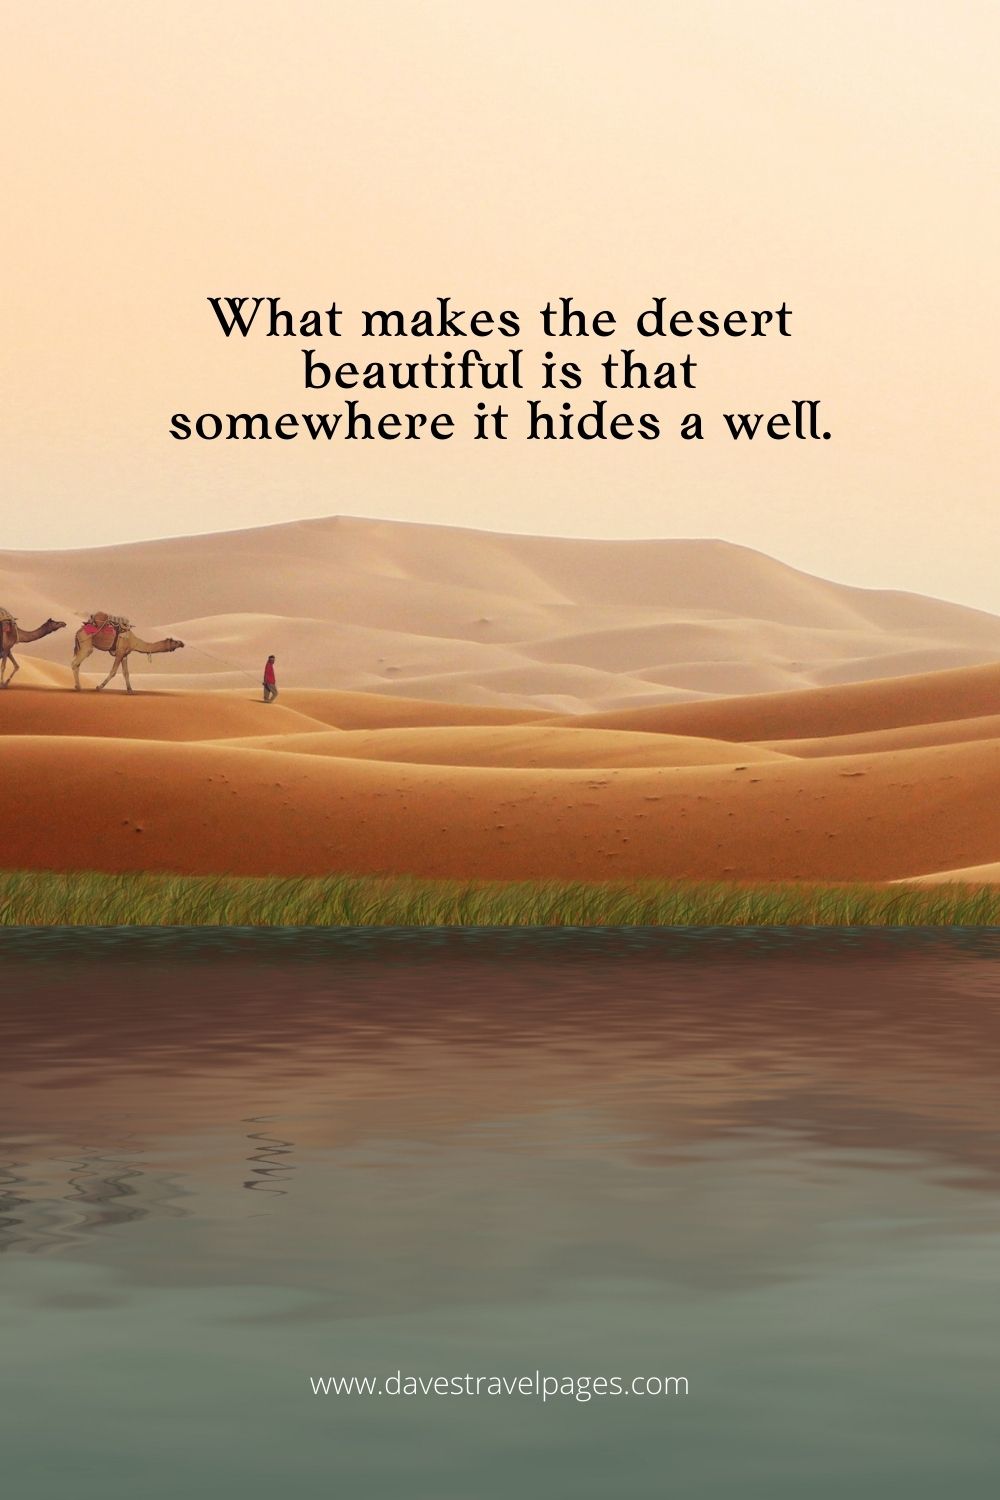 What makes the desert beautiful?